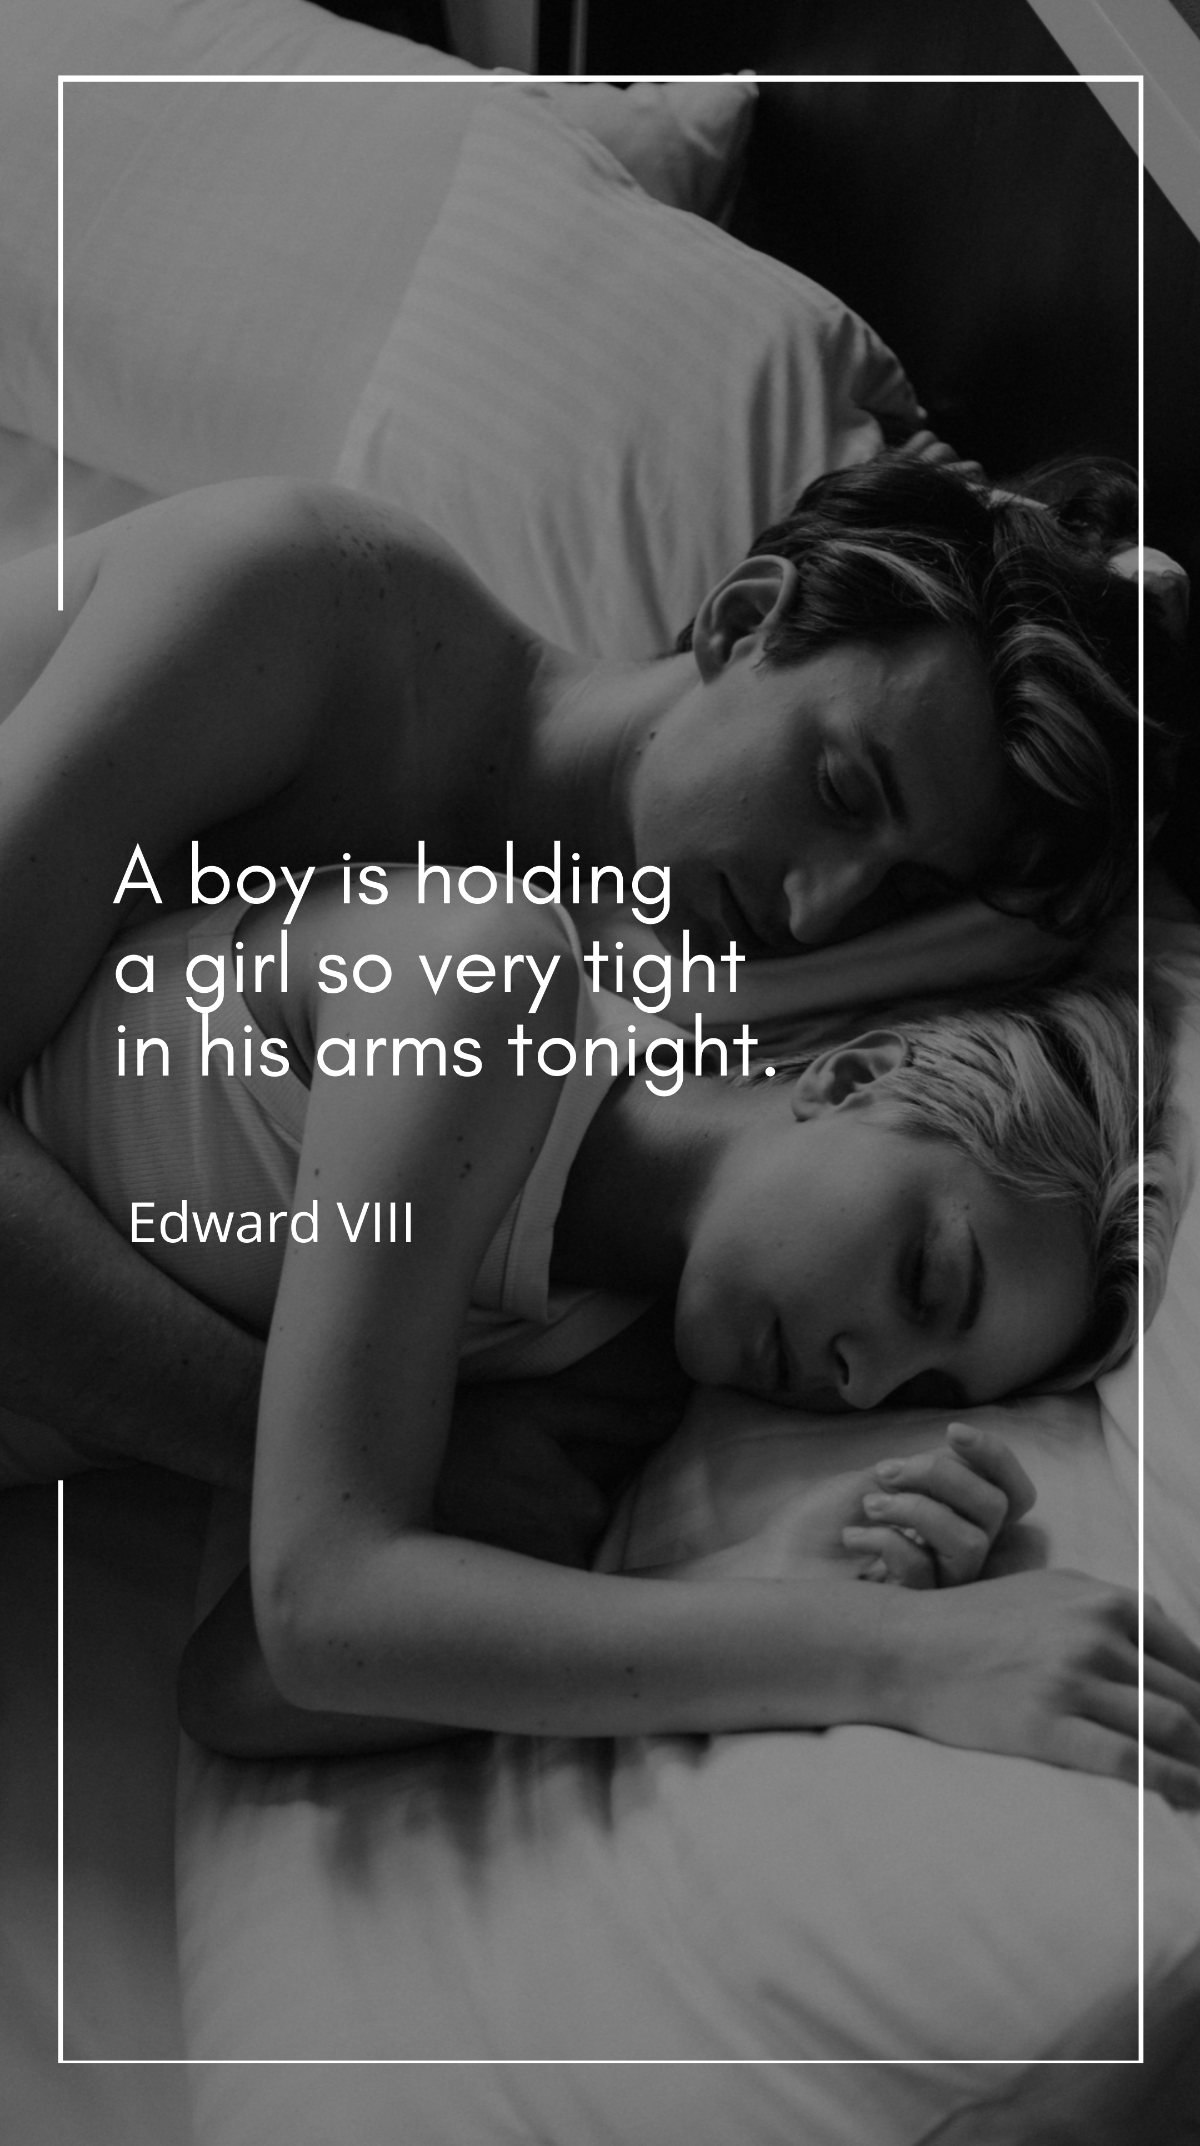 Edward VIII - “A boy is holding a girl so very tight in his arms tonight.” Template